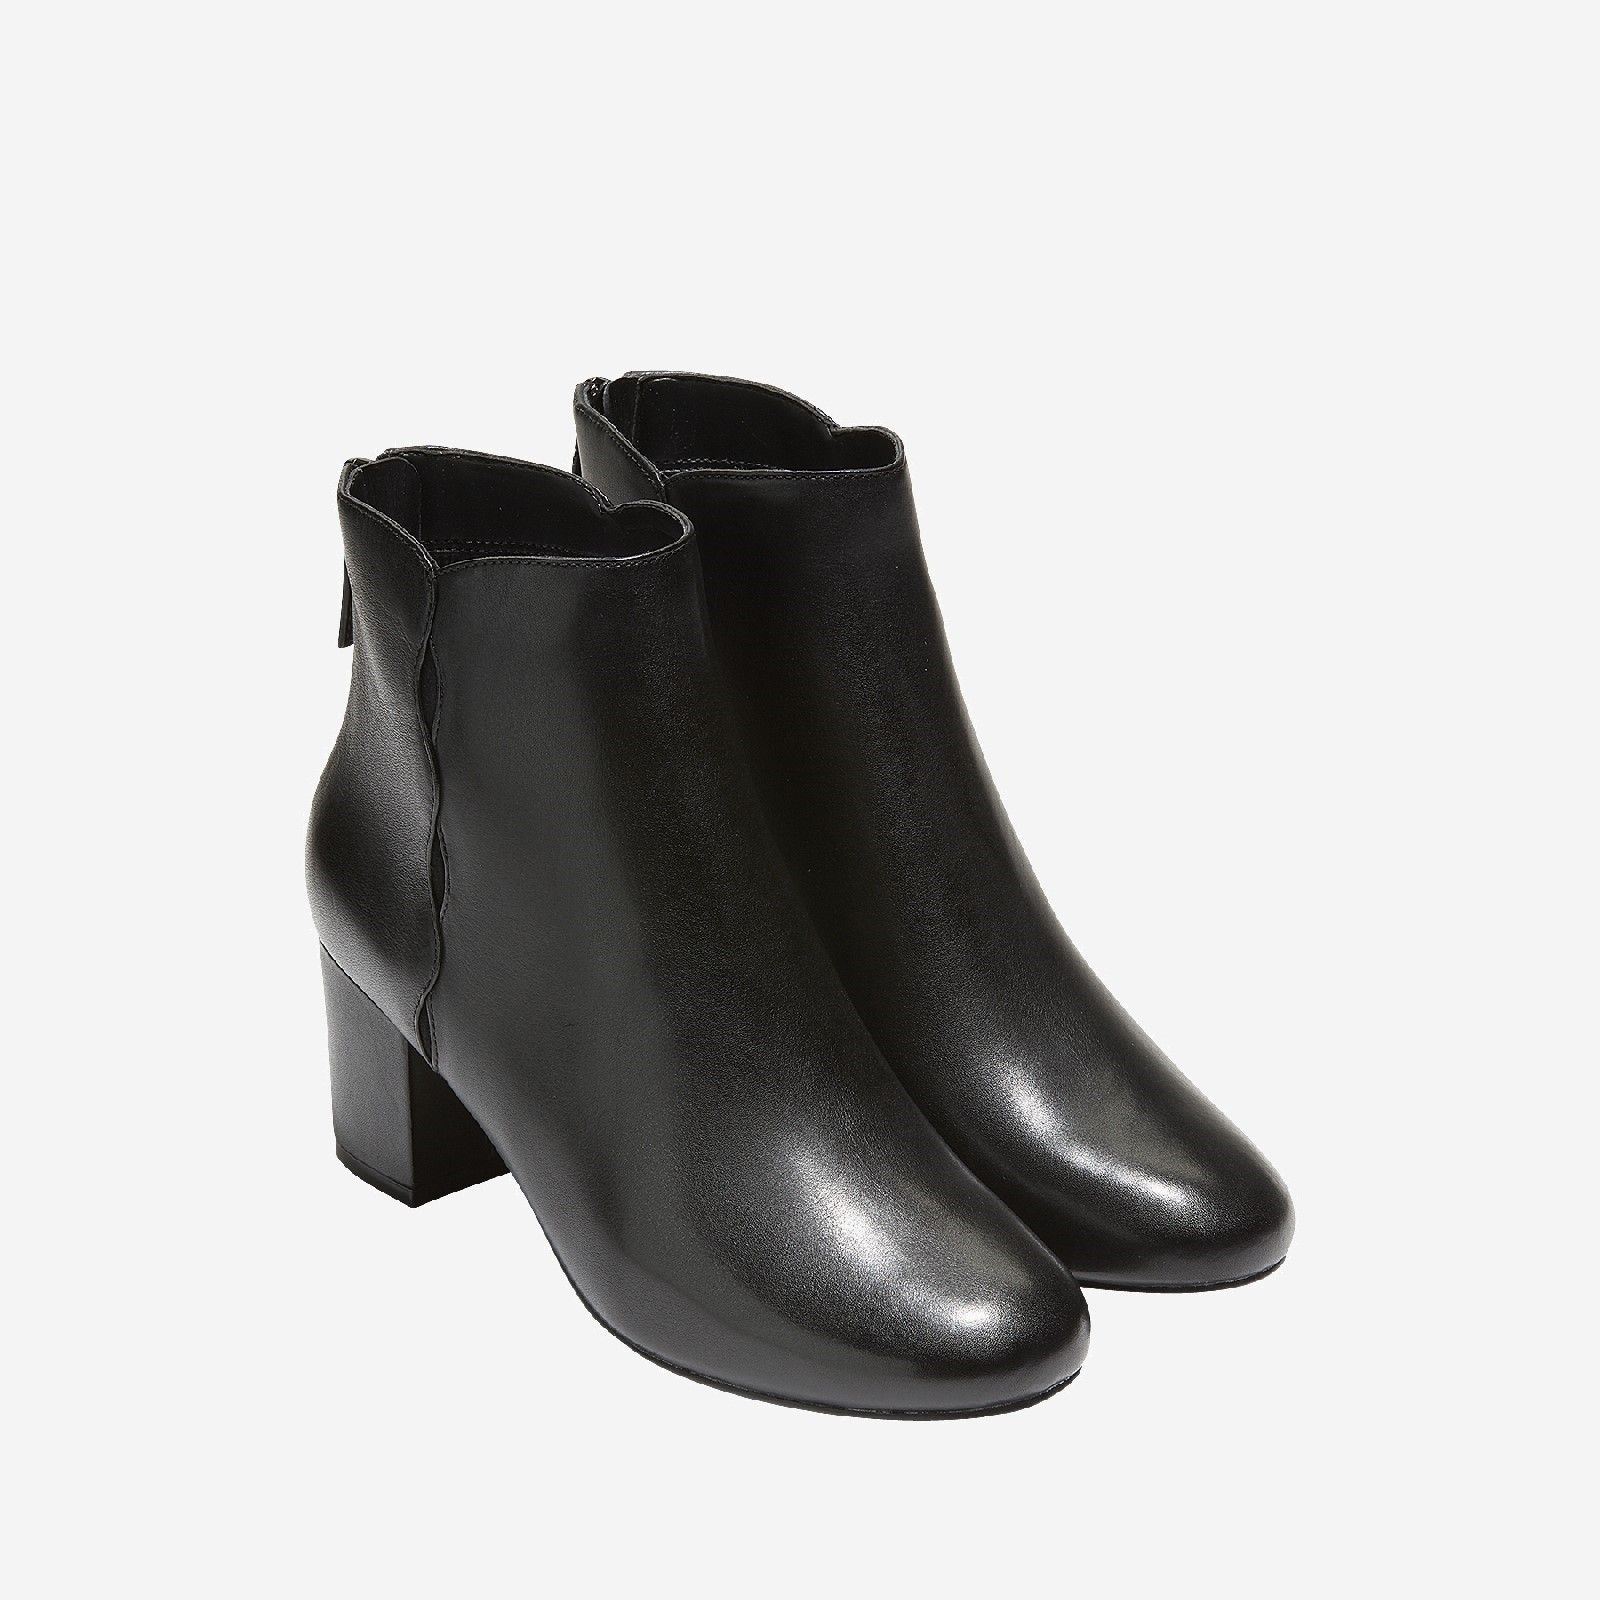 Designed with GRAND 360 technology, this bootie will be your go-to, everyday bootie that you can pair with any outfit. Leather upper with back zipper for easy entry..